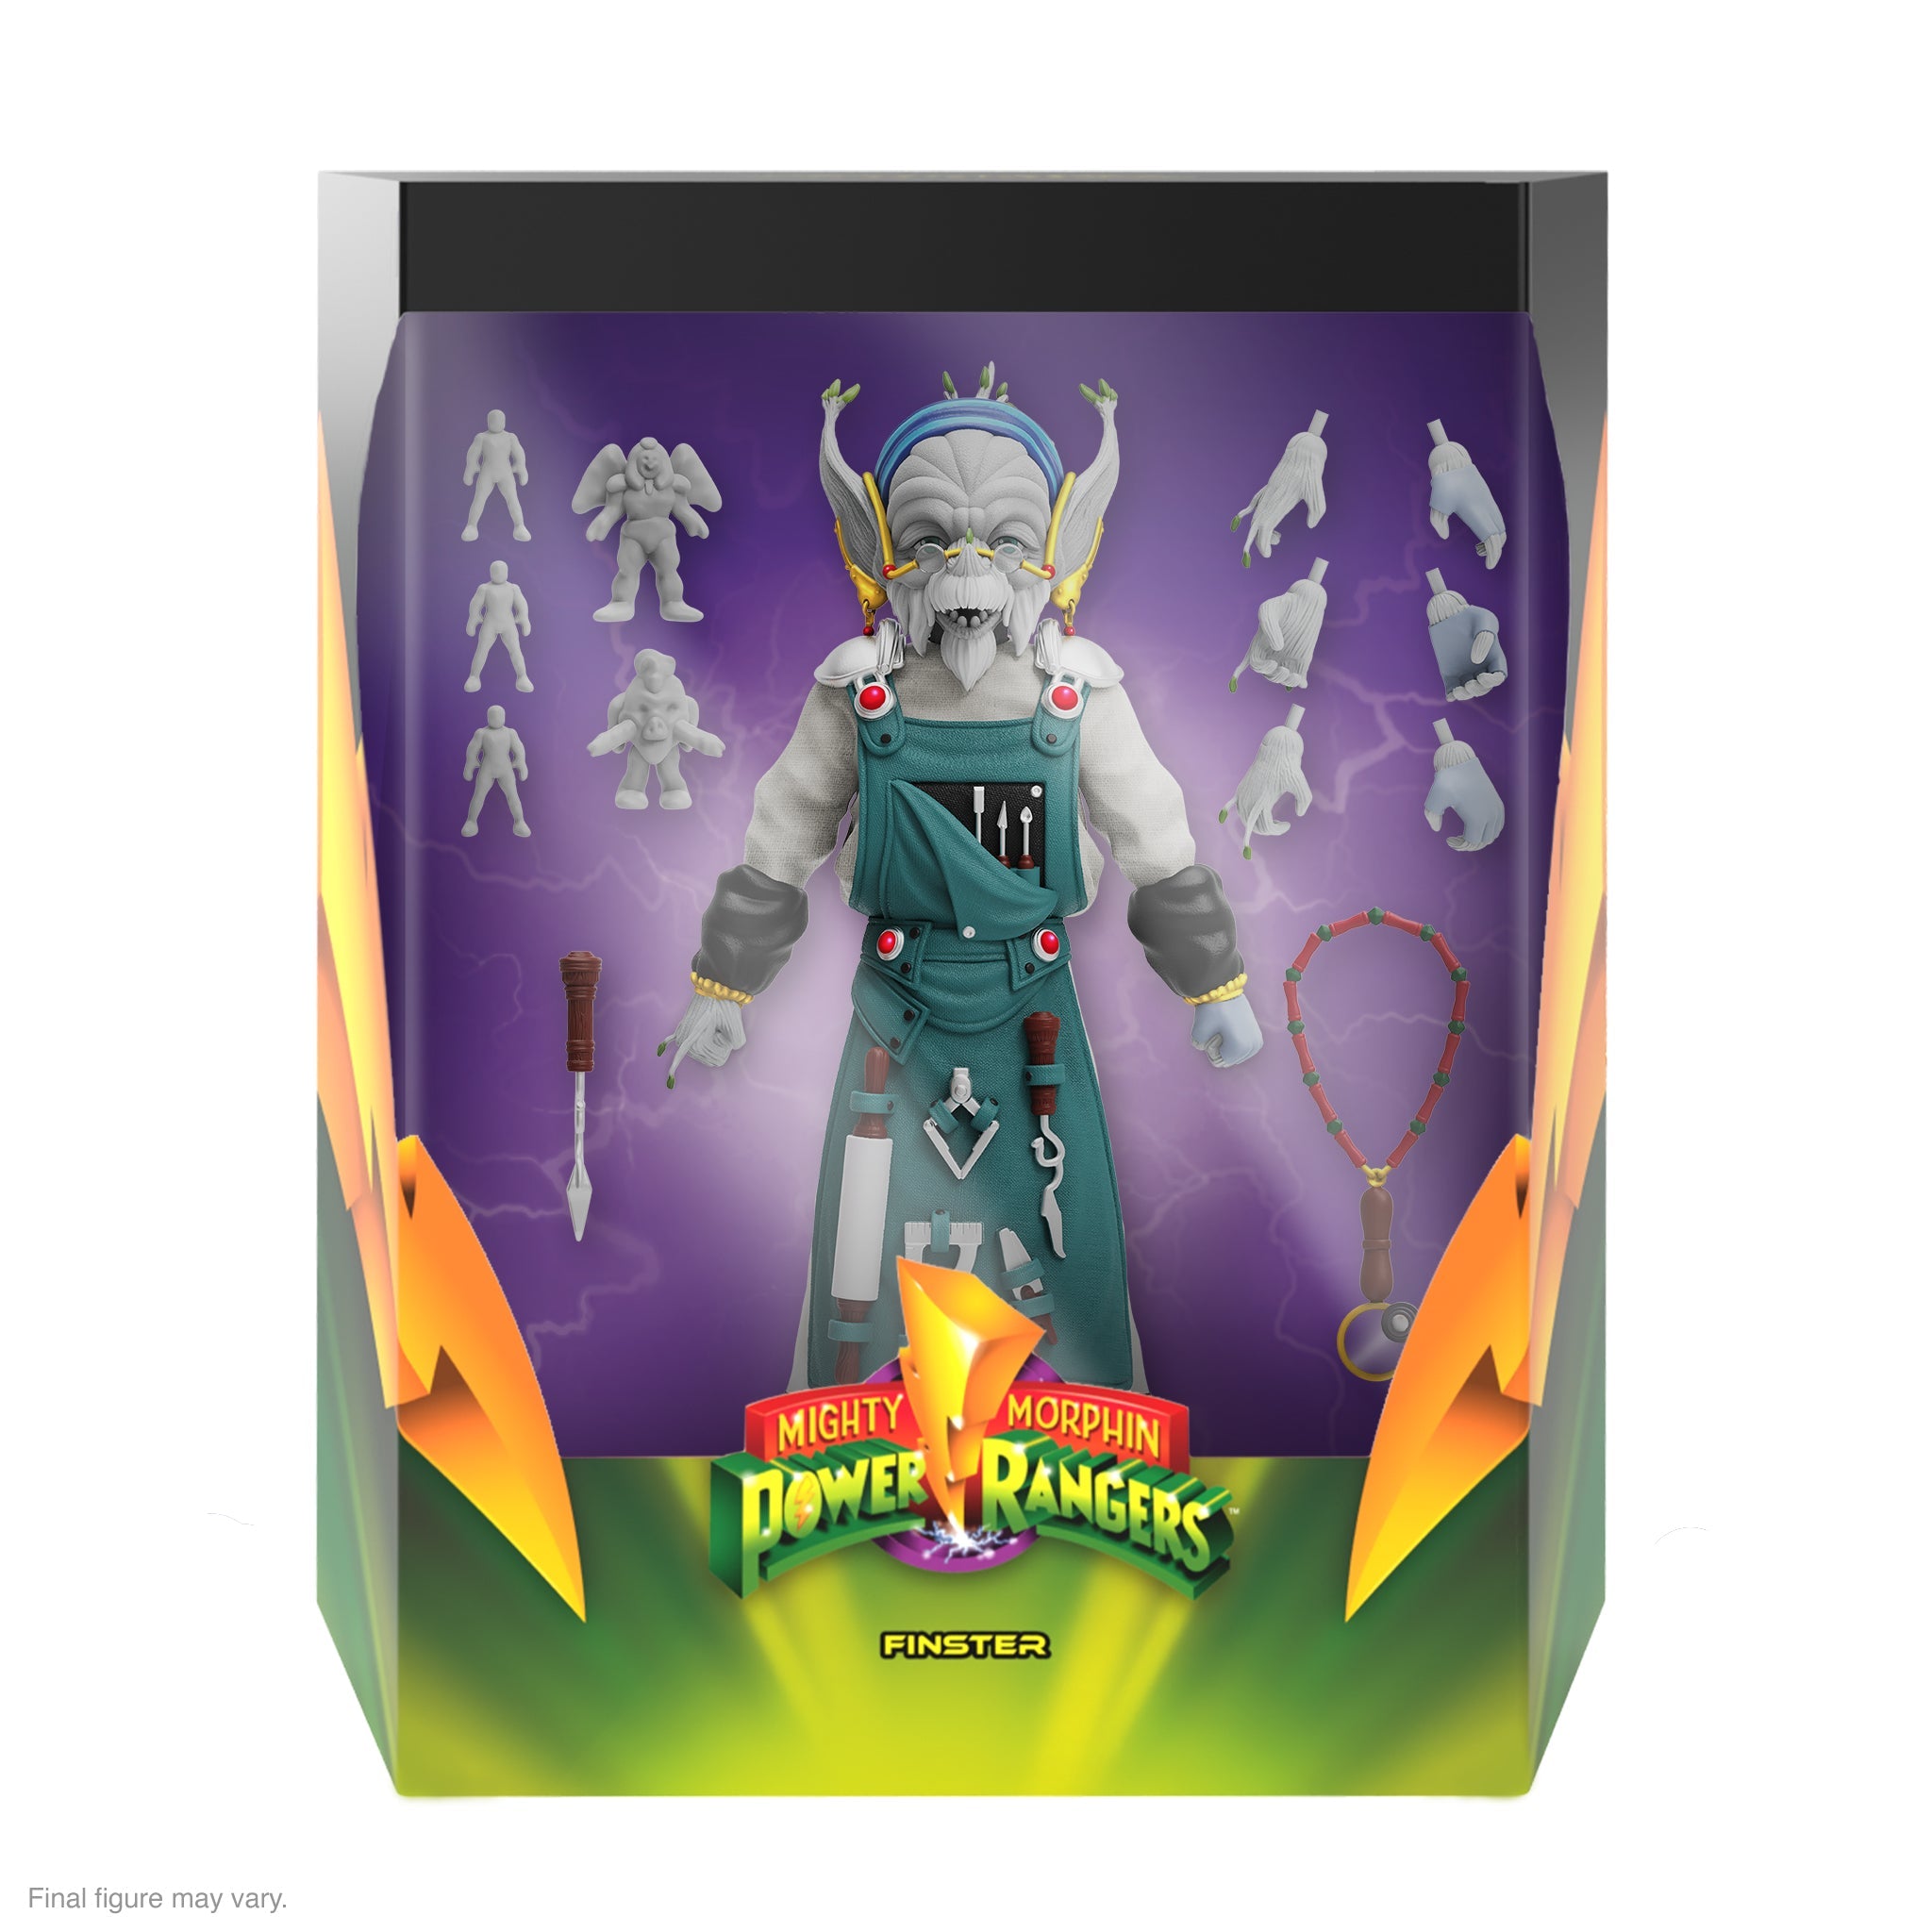 Super7 - Mighty Morphin Power Rangers ULTIMATES! - Wave 3 - Finster - Marvelous Toys